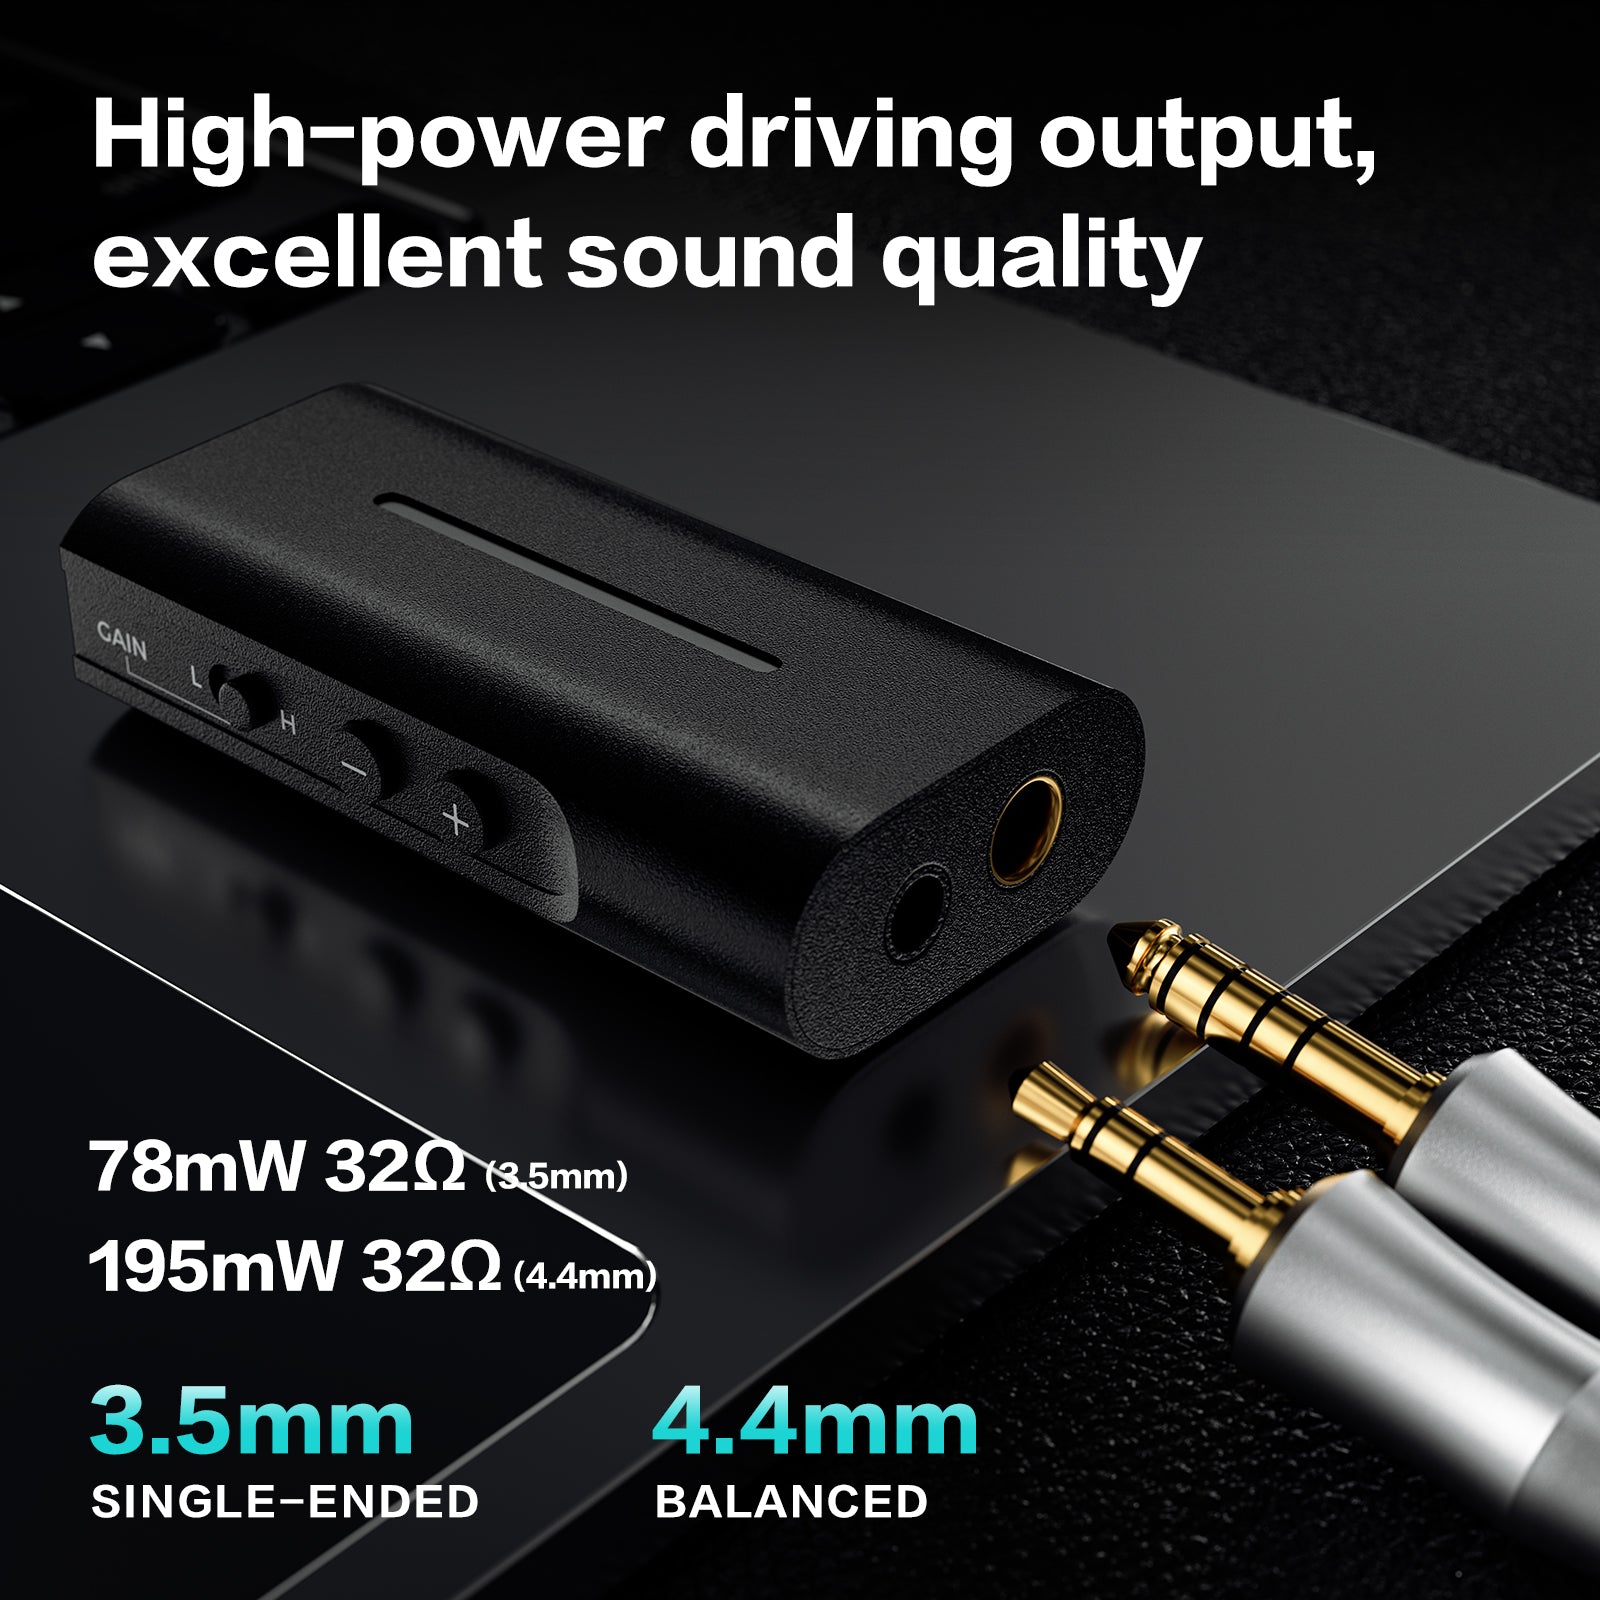 Letshuoer DT03 Headphone Amplifier Portable High Resolution Lossless DAC/AMP Supports 32bit/384kHz and DSD256 Headphone with USB Input and Dual Headphone Outputs 3.5mm/4.4mm Compatible with Smartphones/Laptop/PC/Music Players-Black (iOS Android Mac)